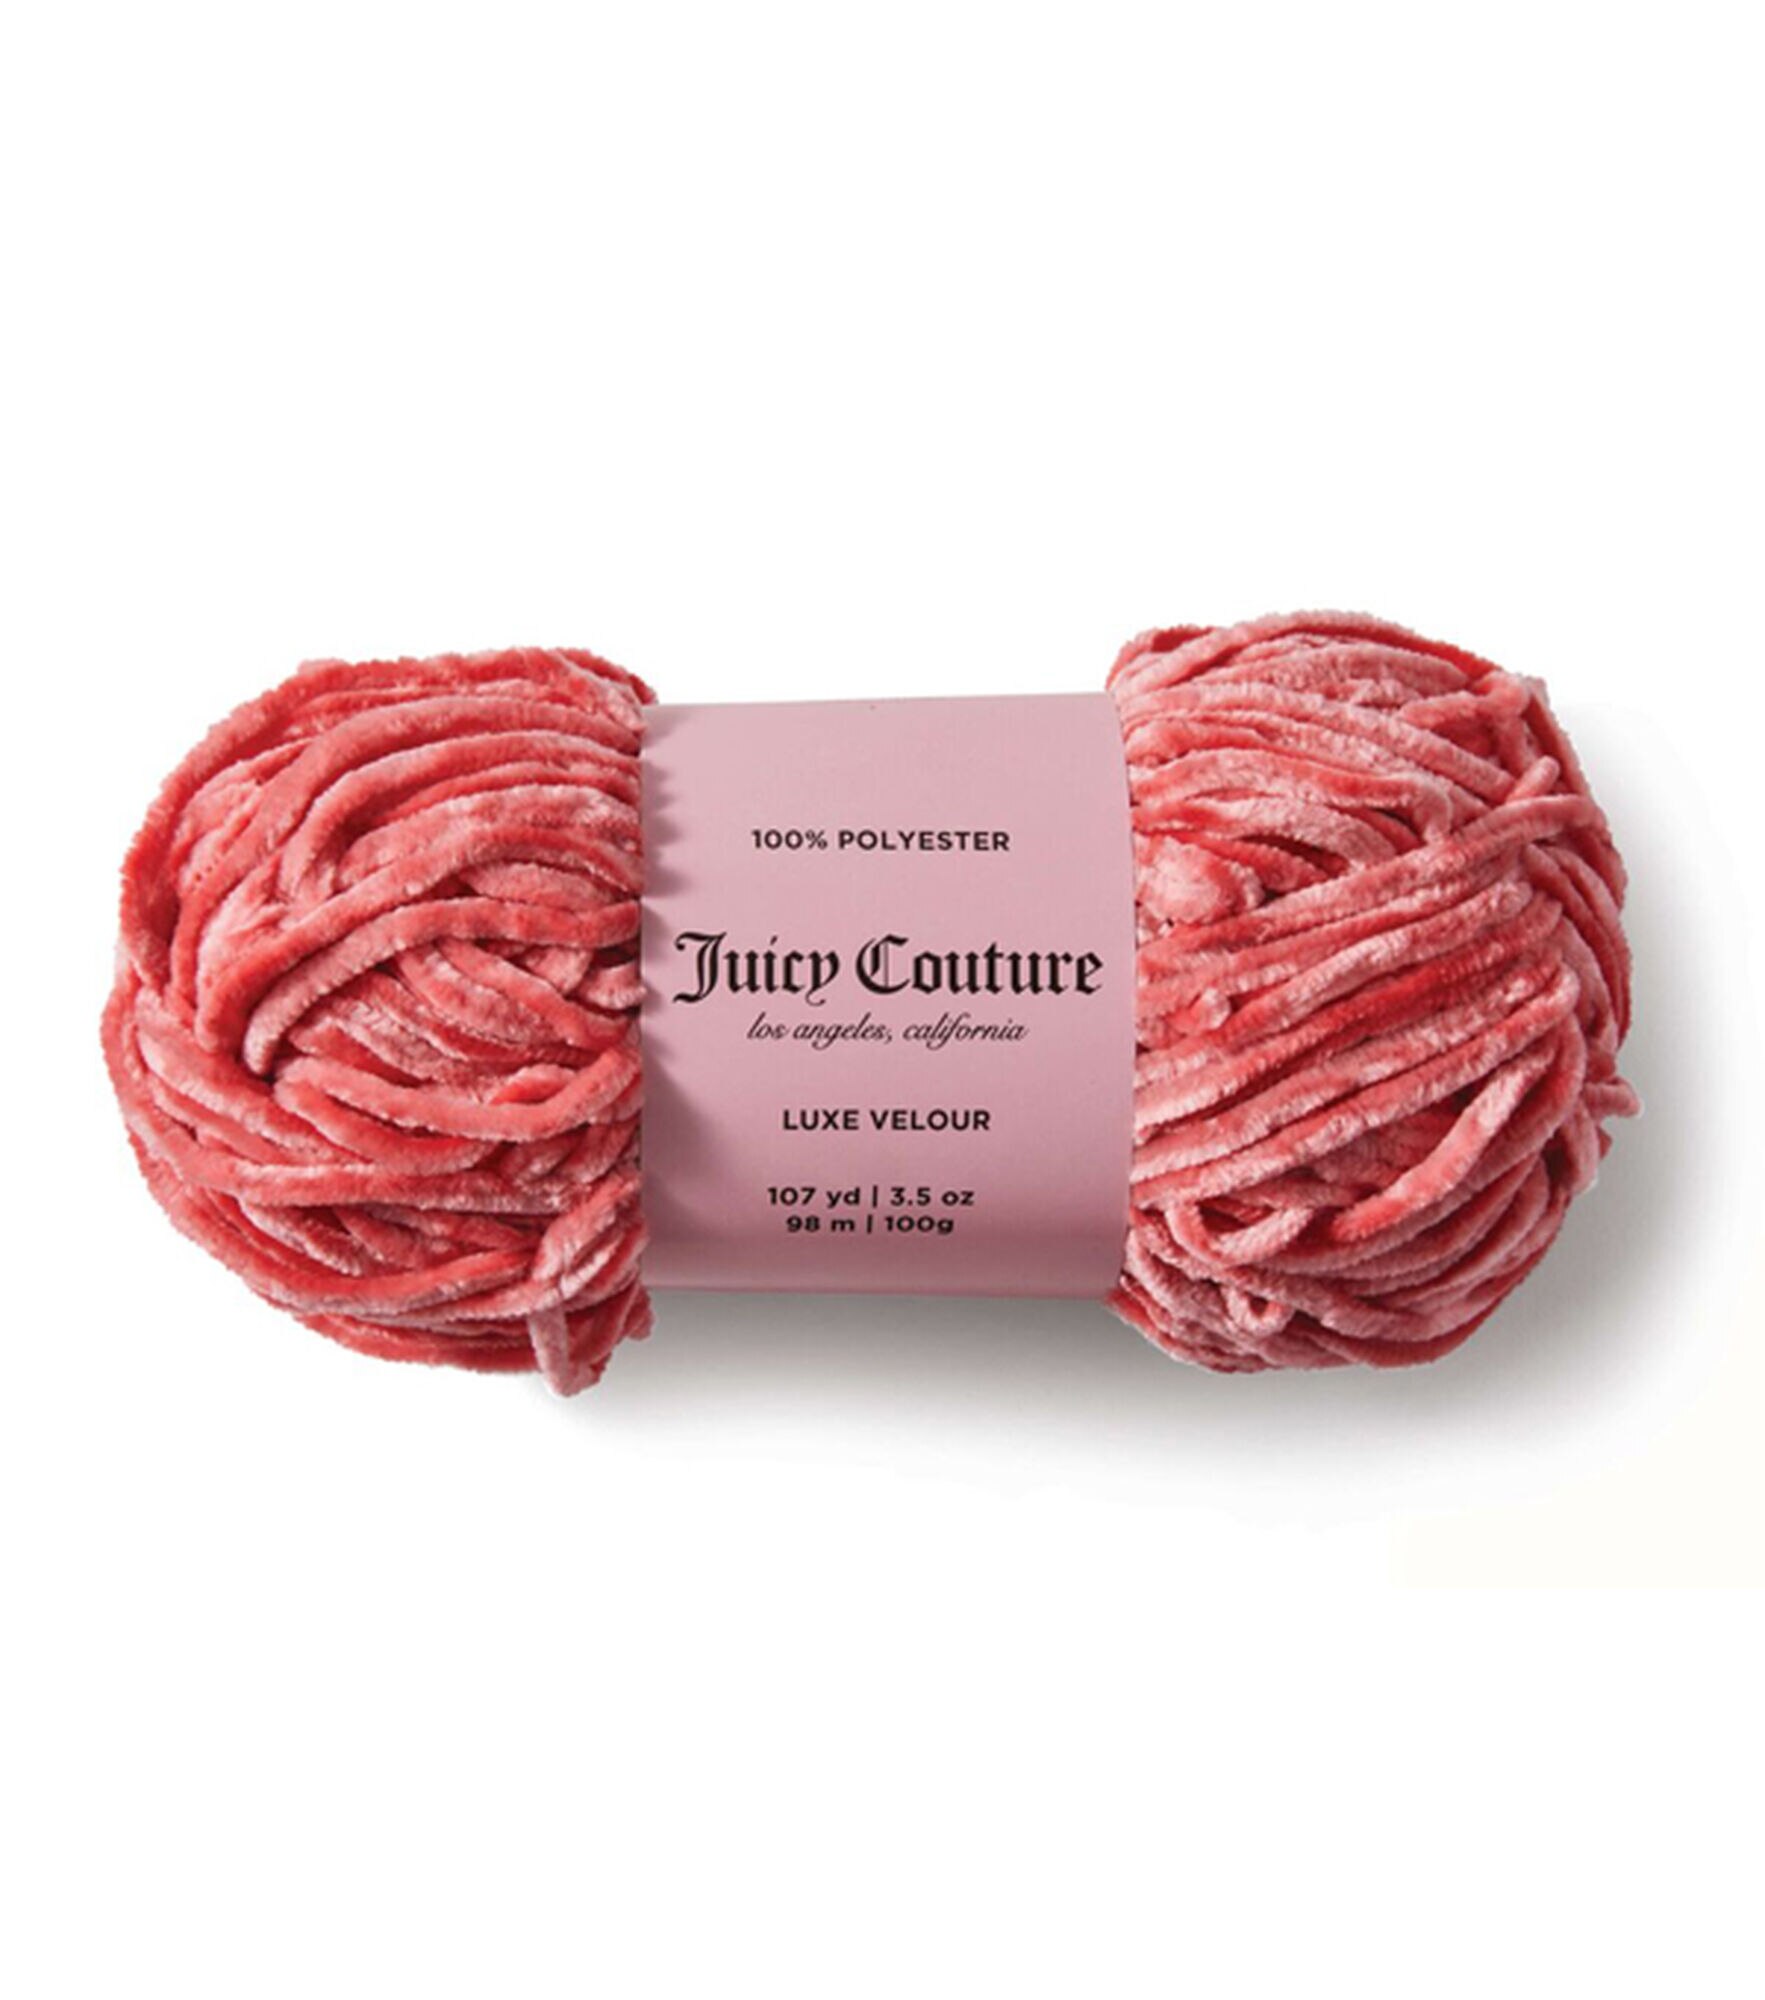 Juicy Couture Luxe Velour 107yds Bulky Polyester Yarn, Coral Haze, hi-res